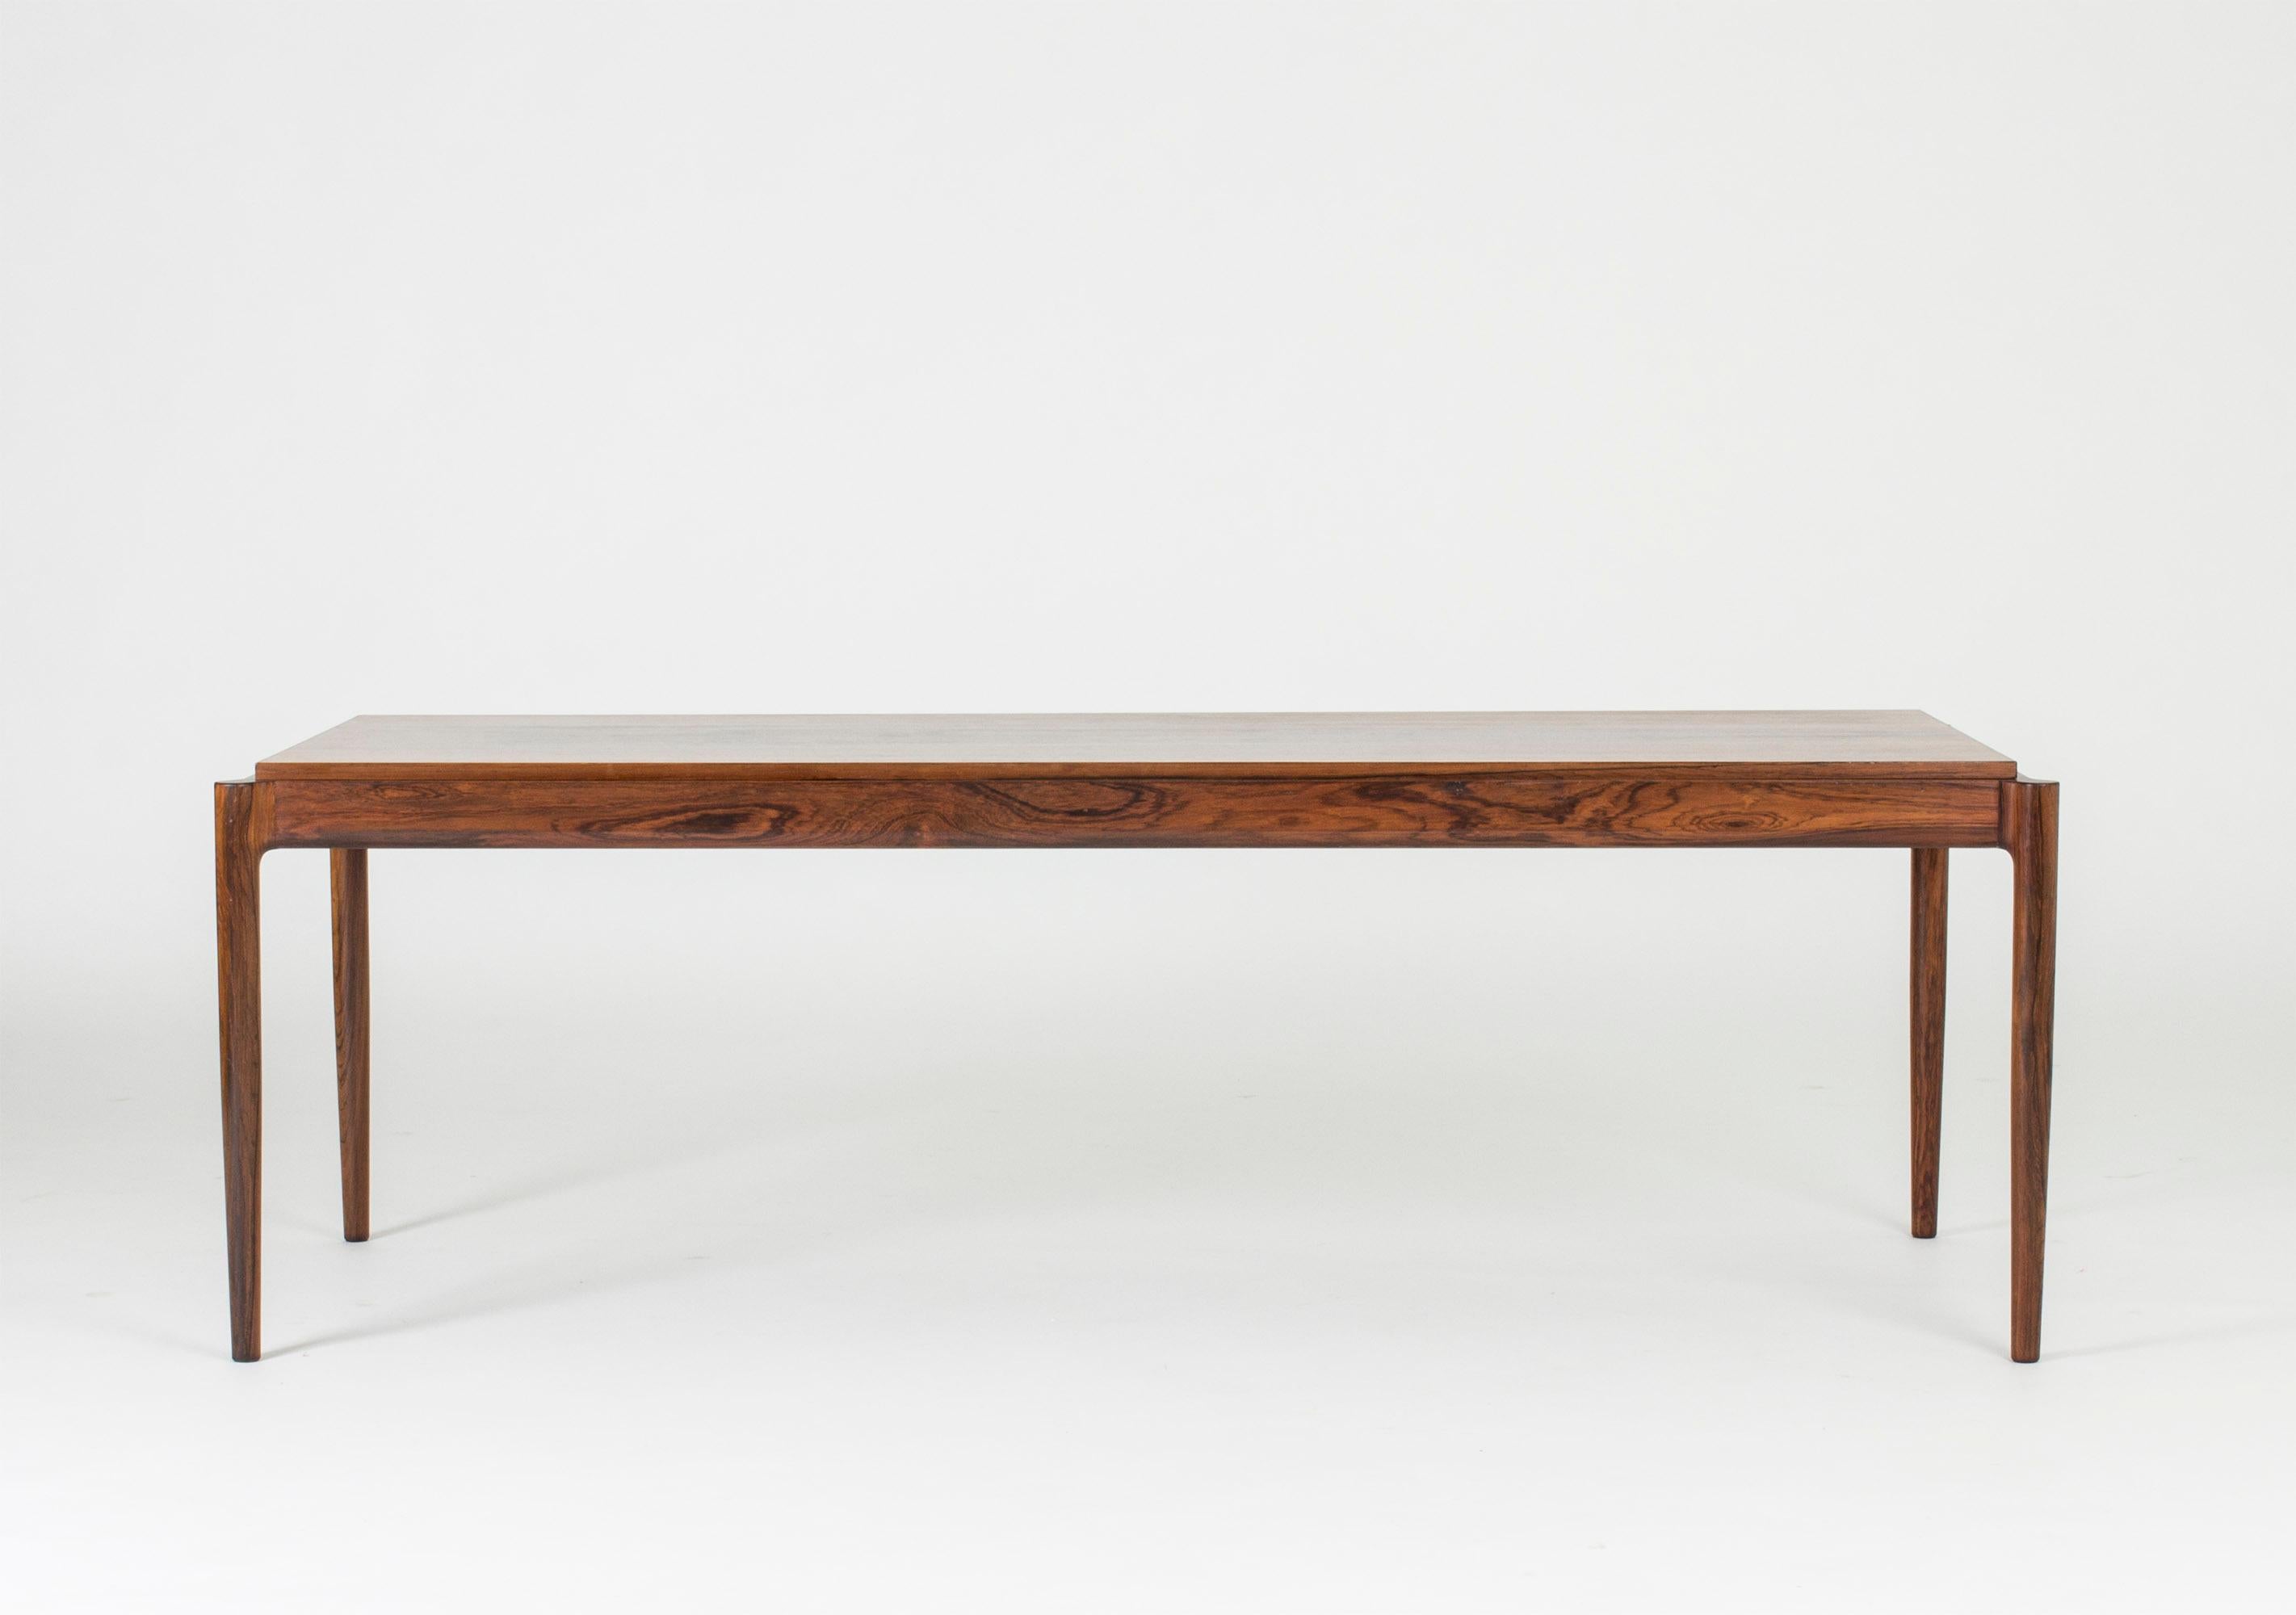 Coffee table with cool attachment of the legs to the table top by Ib Kofod Larsen, made in beautiful rosewood.